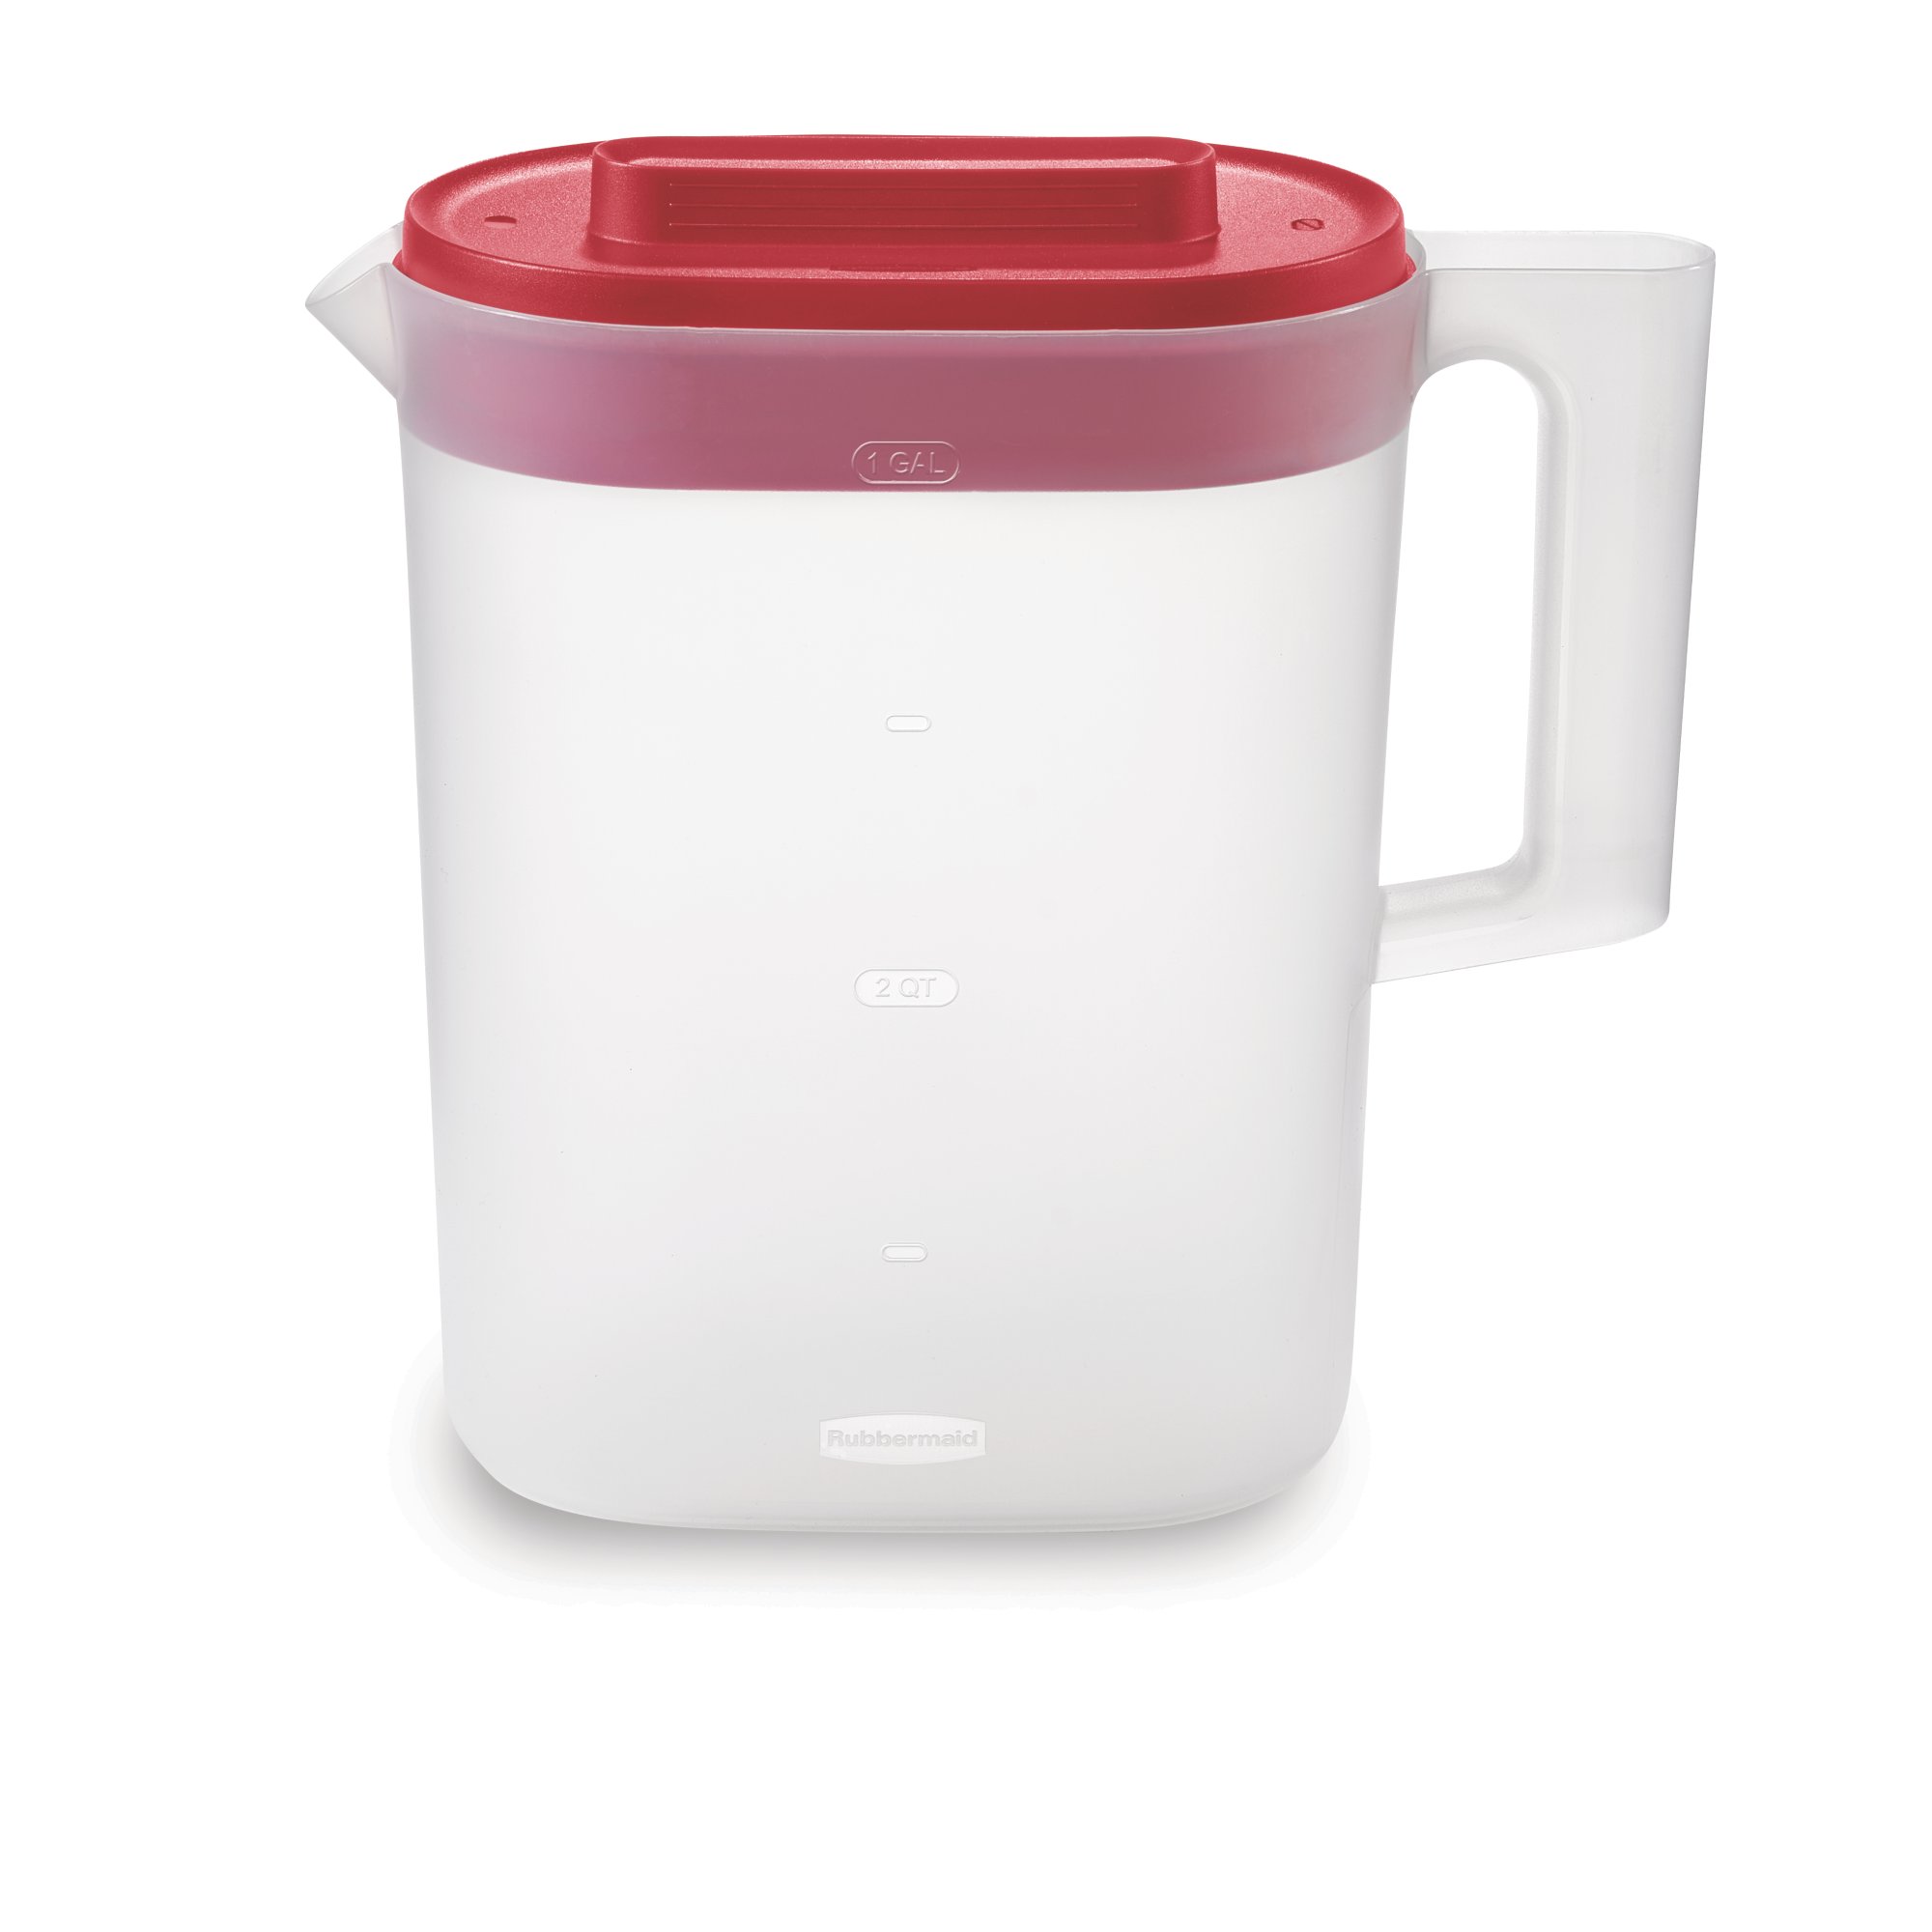 https://s7d9.scene7.com/is/image/NewellRubbermaid/2122602-rubbermaid-food-storage-compact-pitcher-1g-red-straight-on?wid=2000&hei=2000